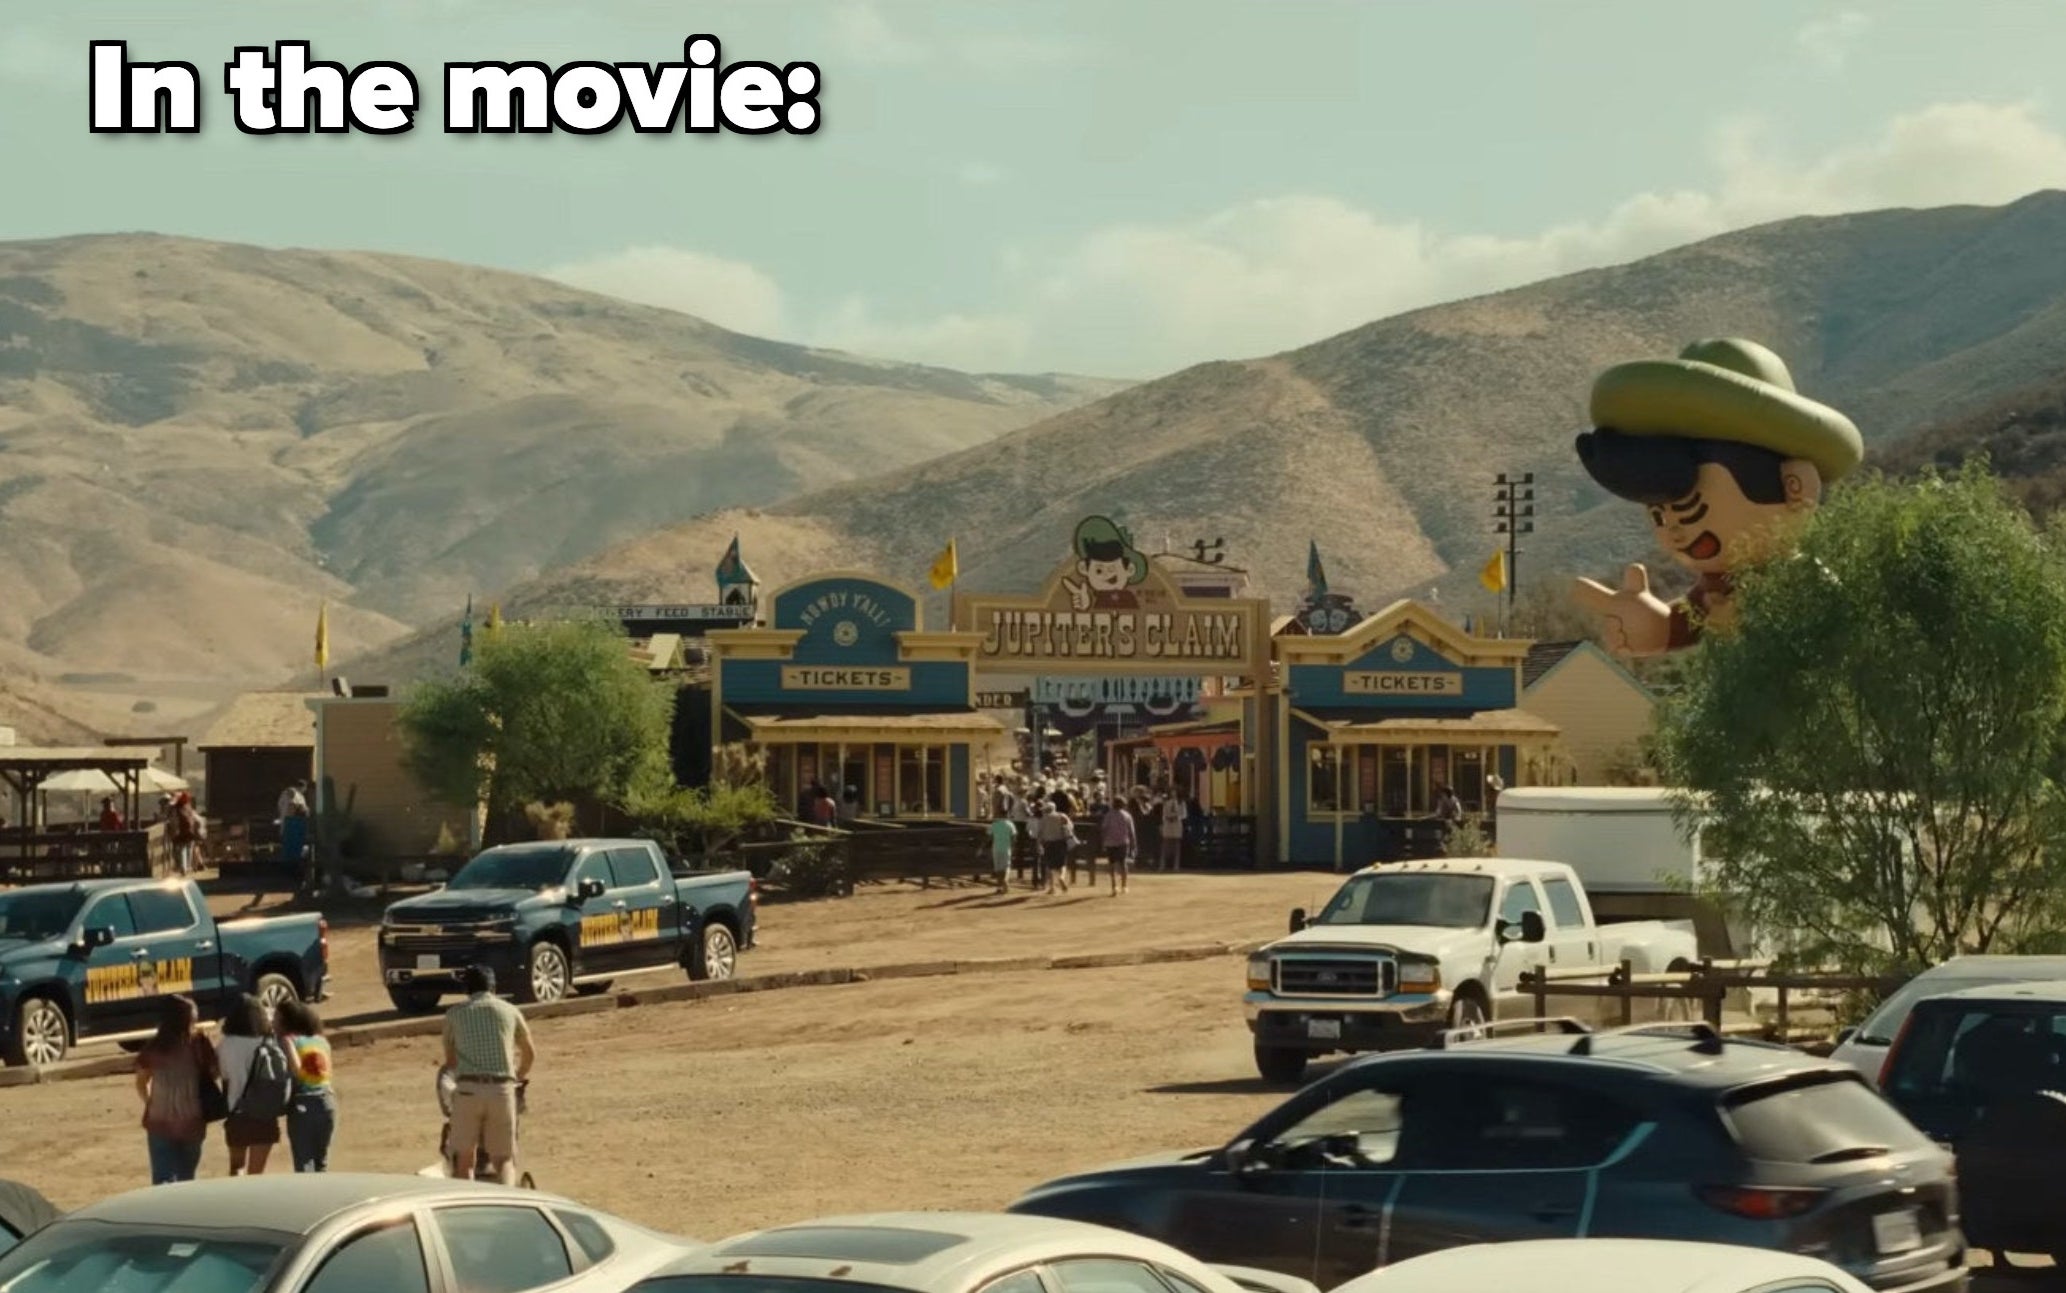 A photo of Jupiter&#x27;s Claim in the movie, with a large sign marking the entrance to the town, which has a giant inflatable mascot next to it and rolling hills behind it